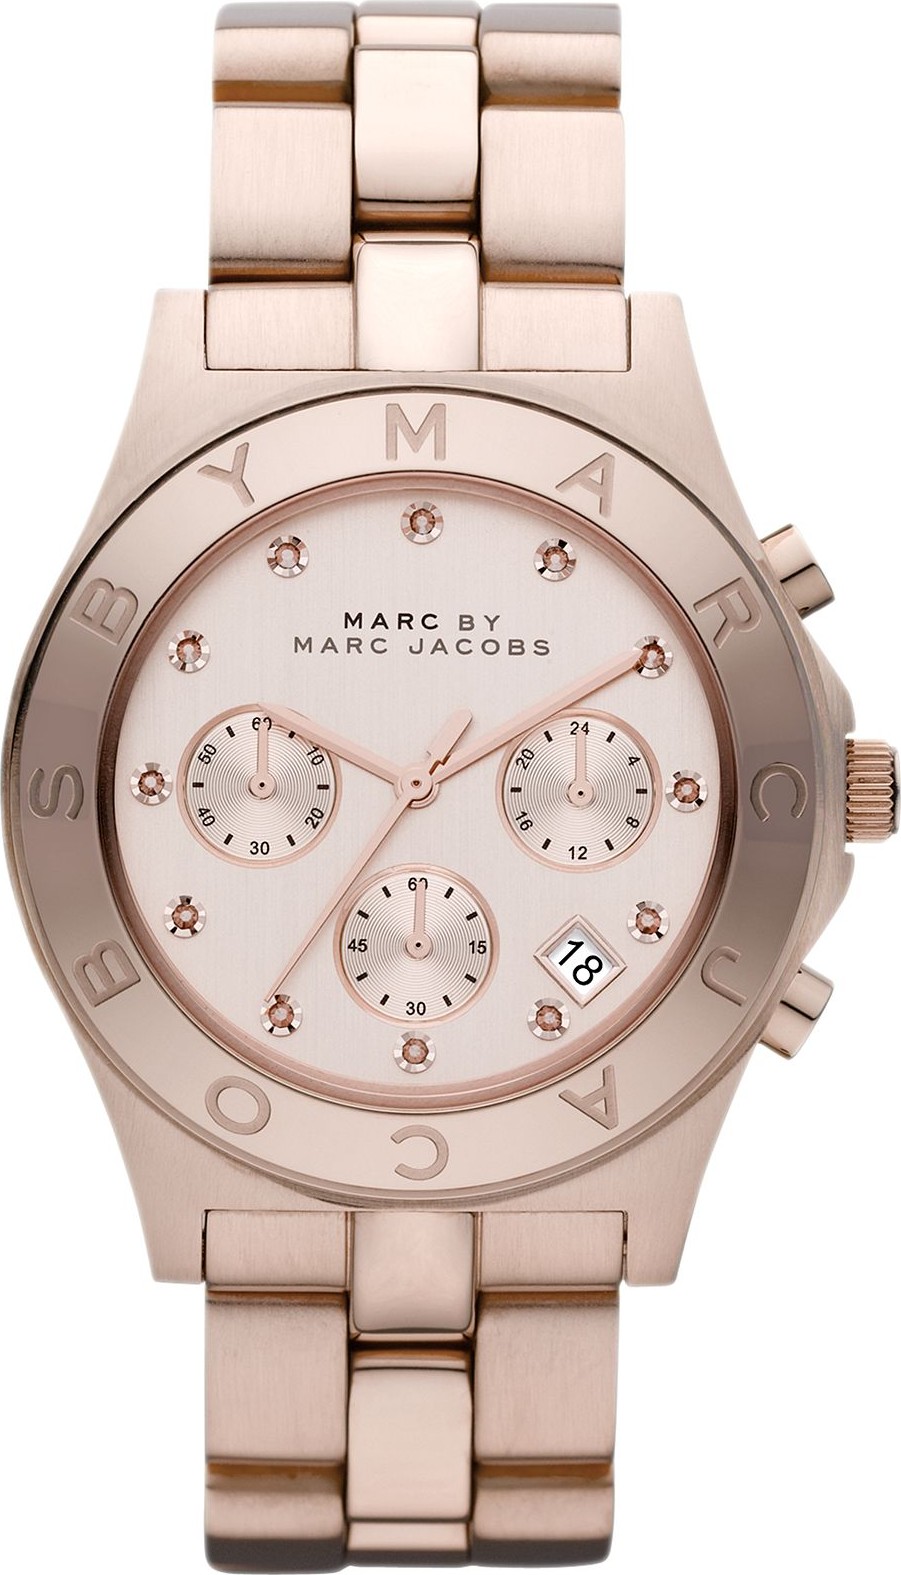 Marc Jacobs Mbm3102 Blade Chronograph Rose Gold Watch 40Mm